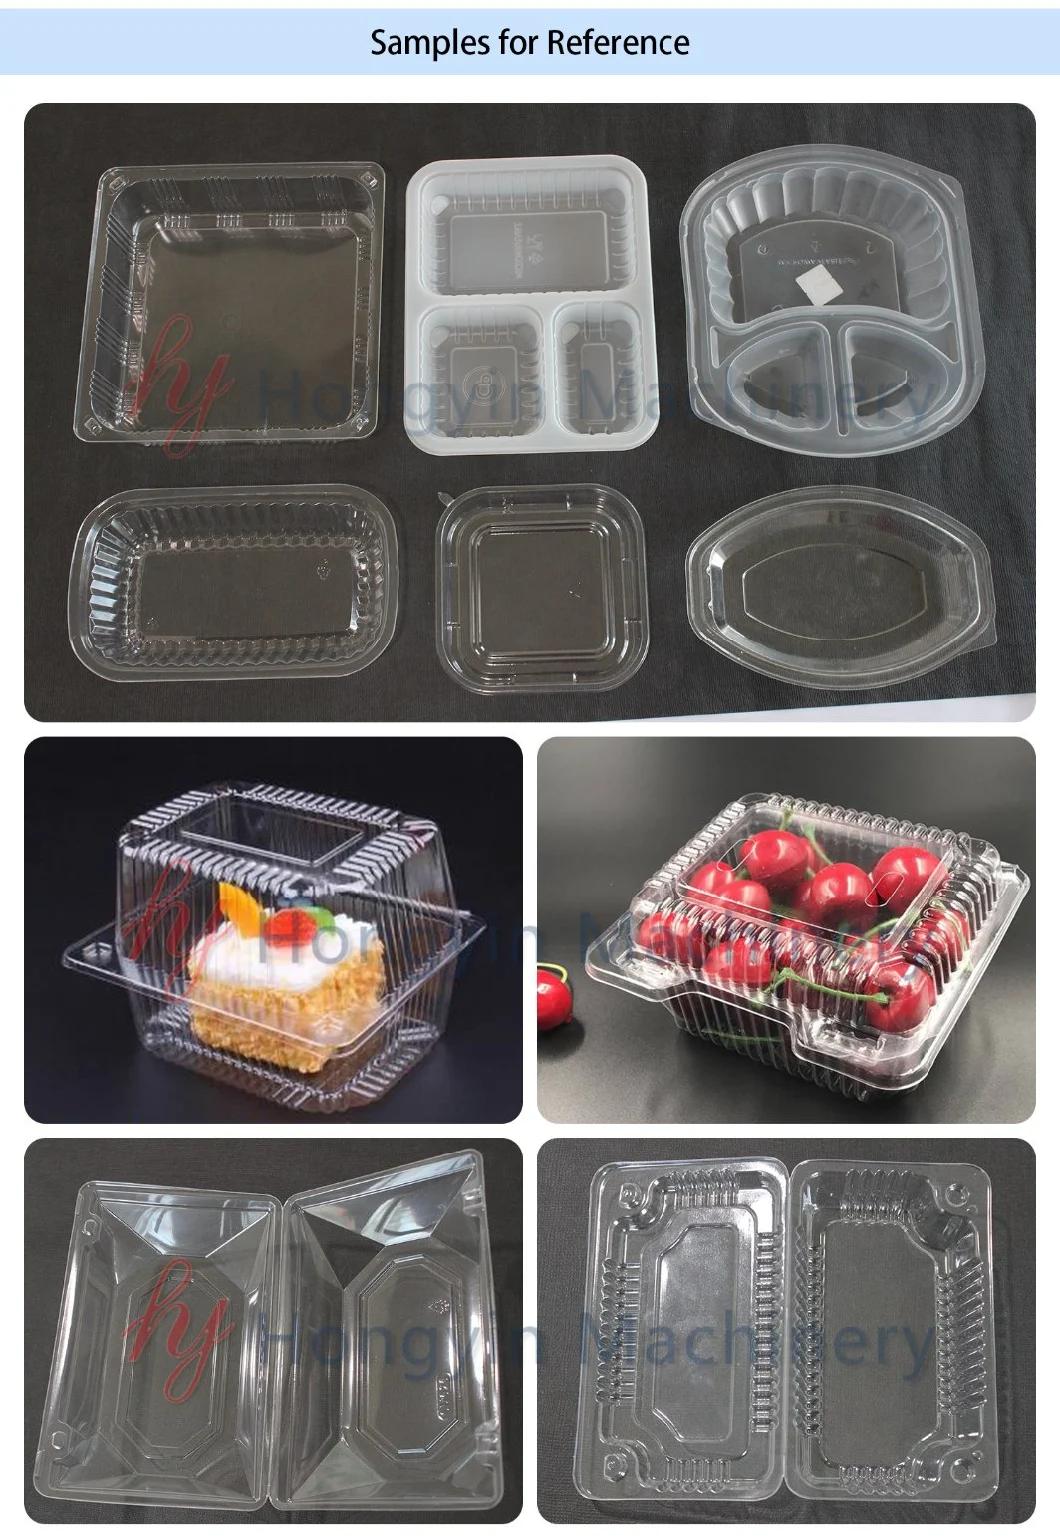 Industry Standard Fast Precise Forming Trimming Lunch Box Plastic Thermoformer